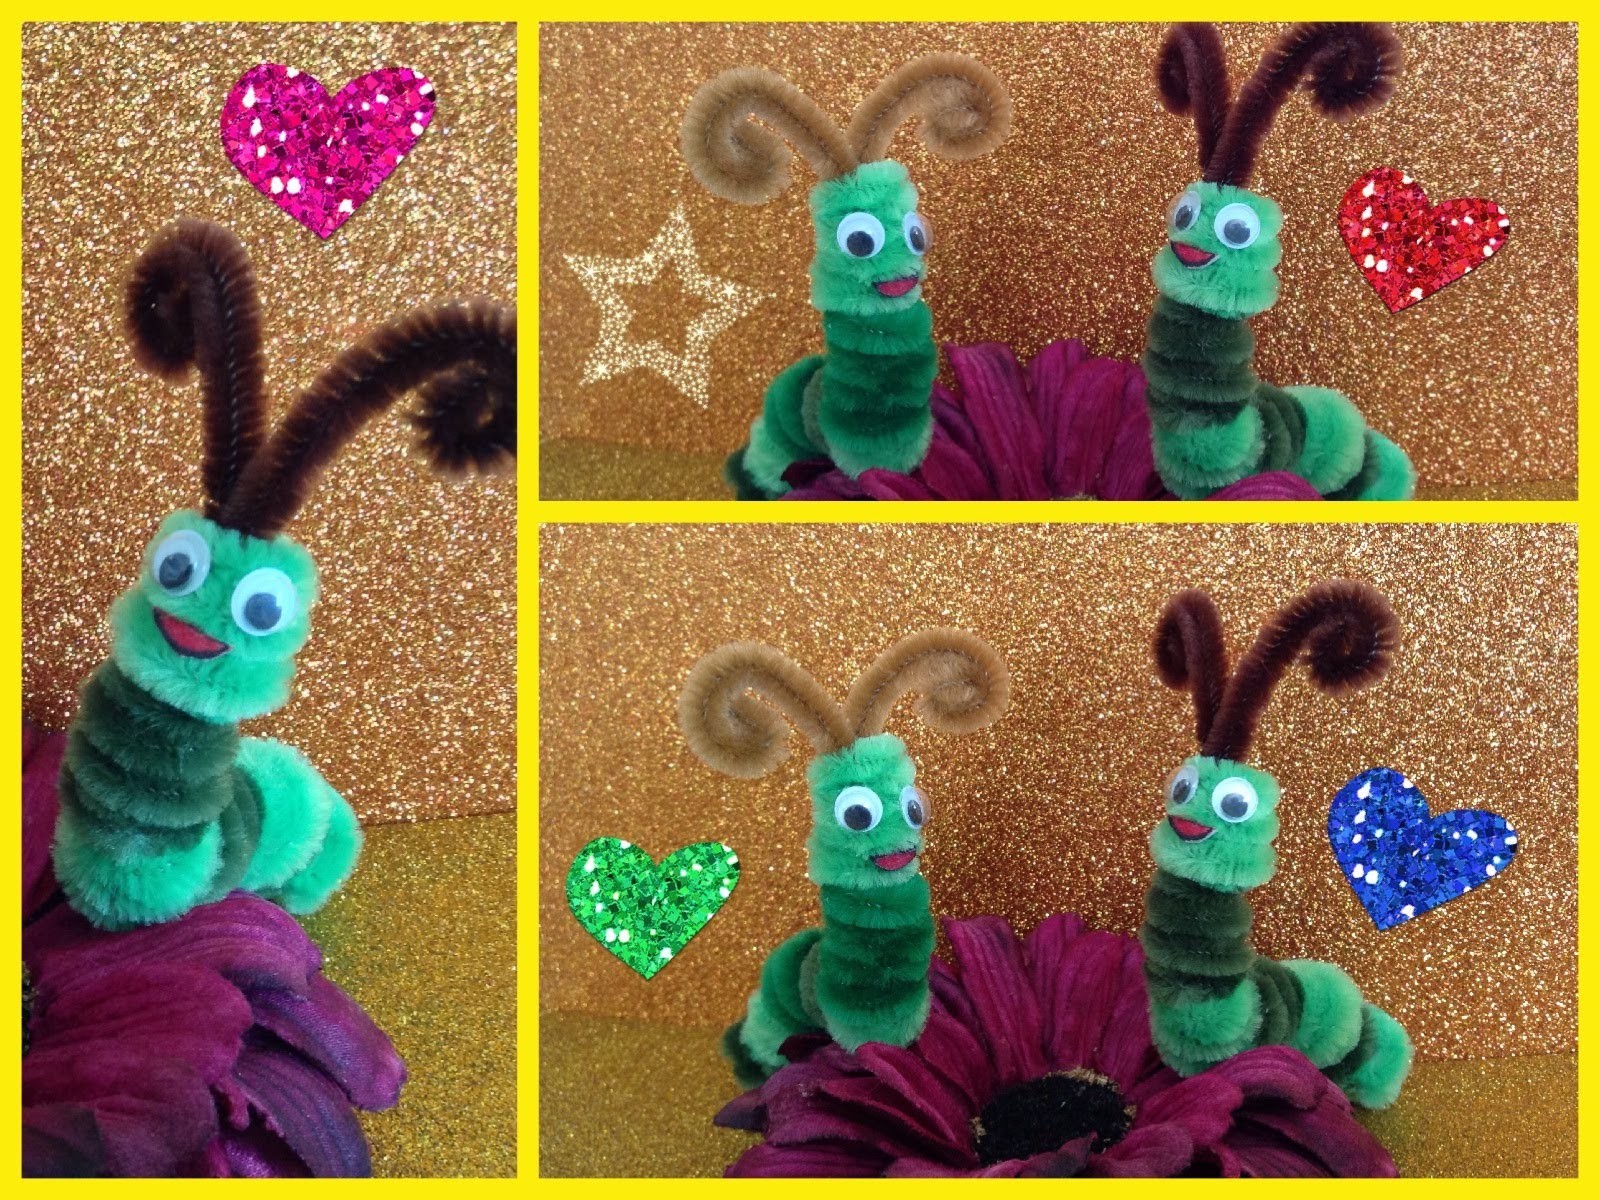 GUSANITO HECHO CON LIMPIA PIPAS. PIPE CLEANER CATERPILLAR .